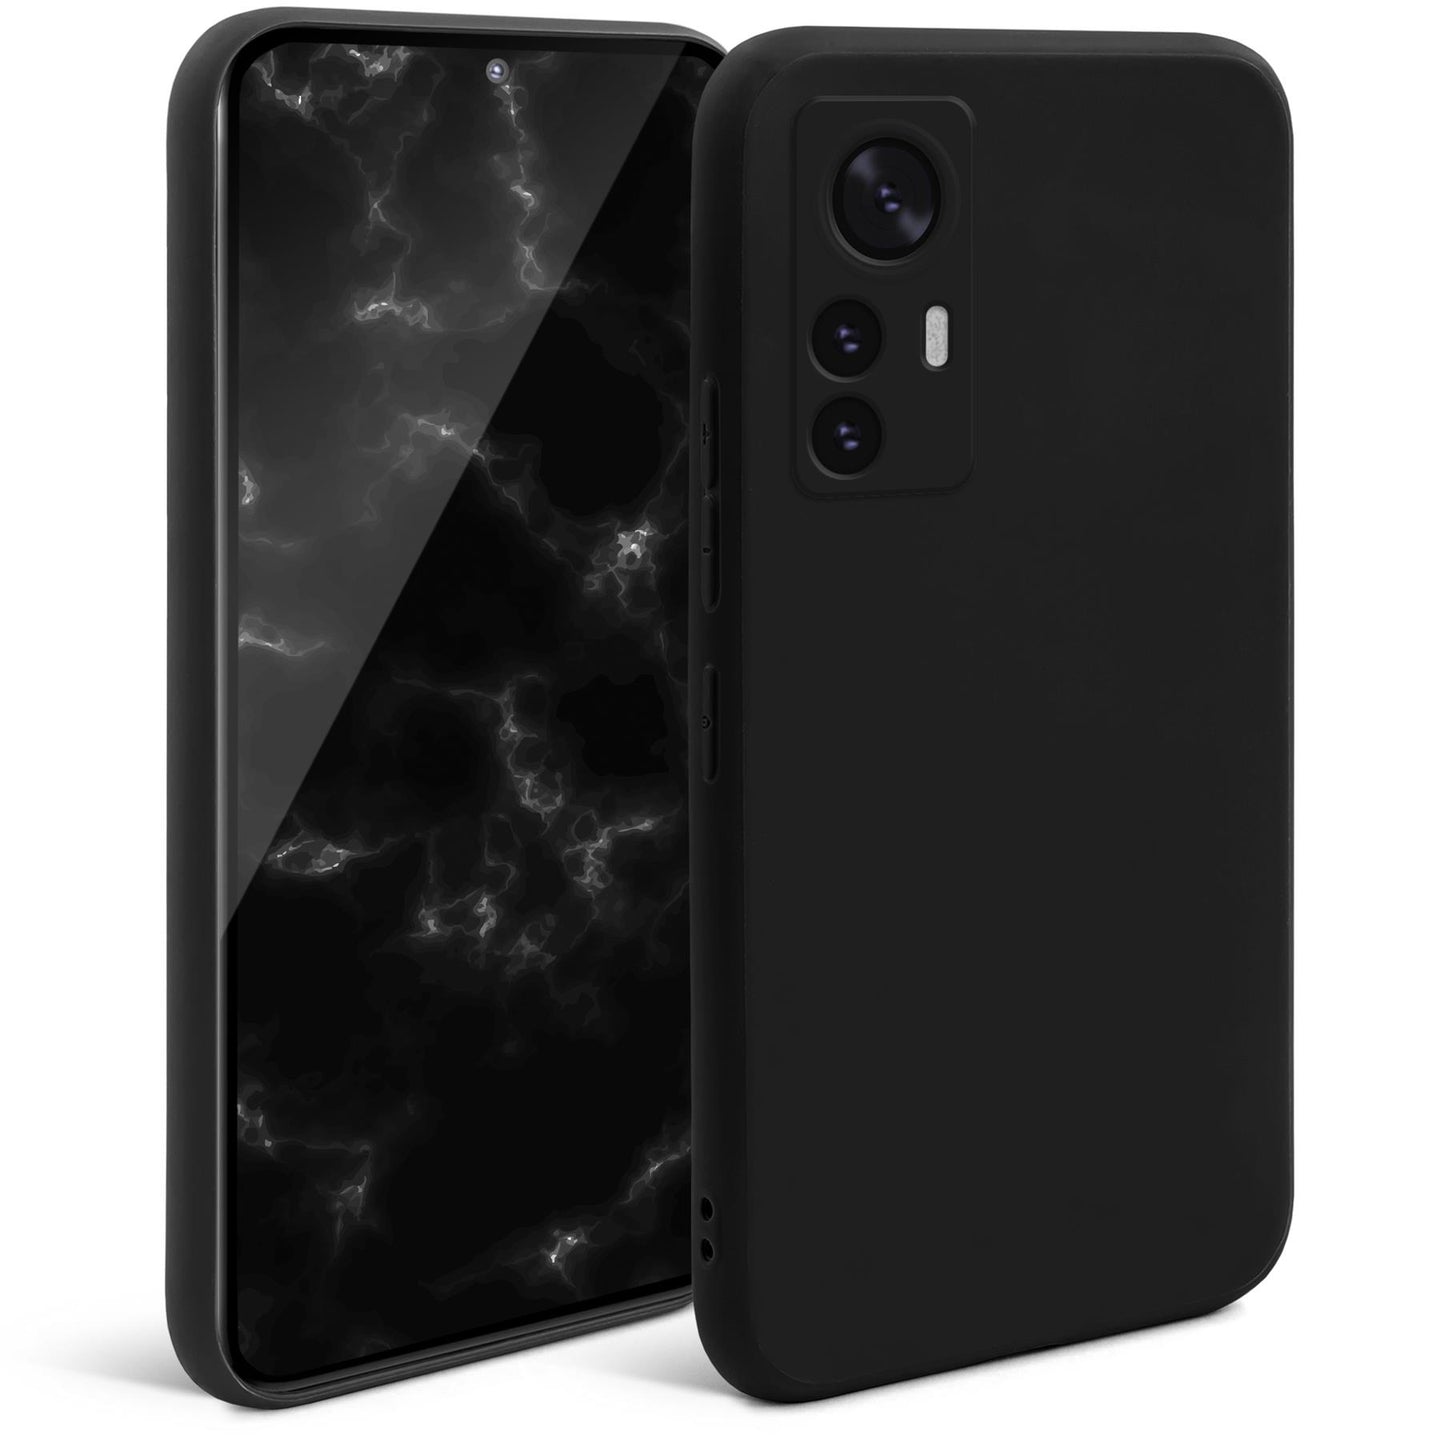 Moozy Minimalist Series Silicone Case for Xiaomi 12 Pro, Black - Matte Finish Lightweight Mobile Phone Case Slim Soft Protective TPU Cover with Matte Surface